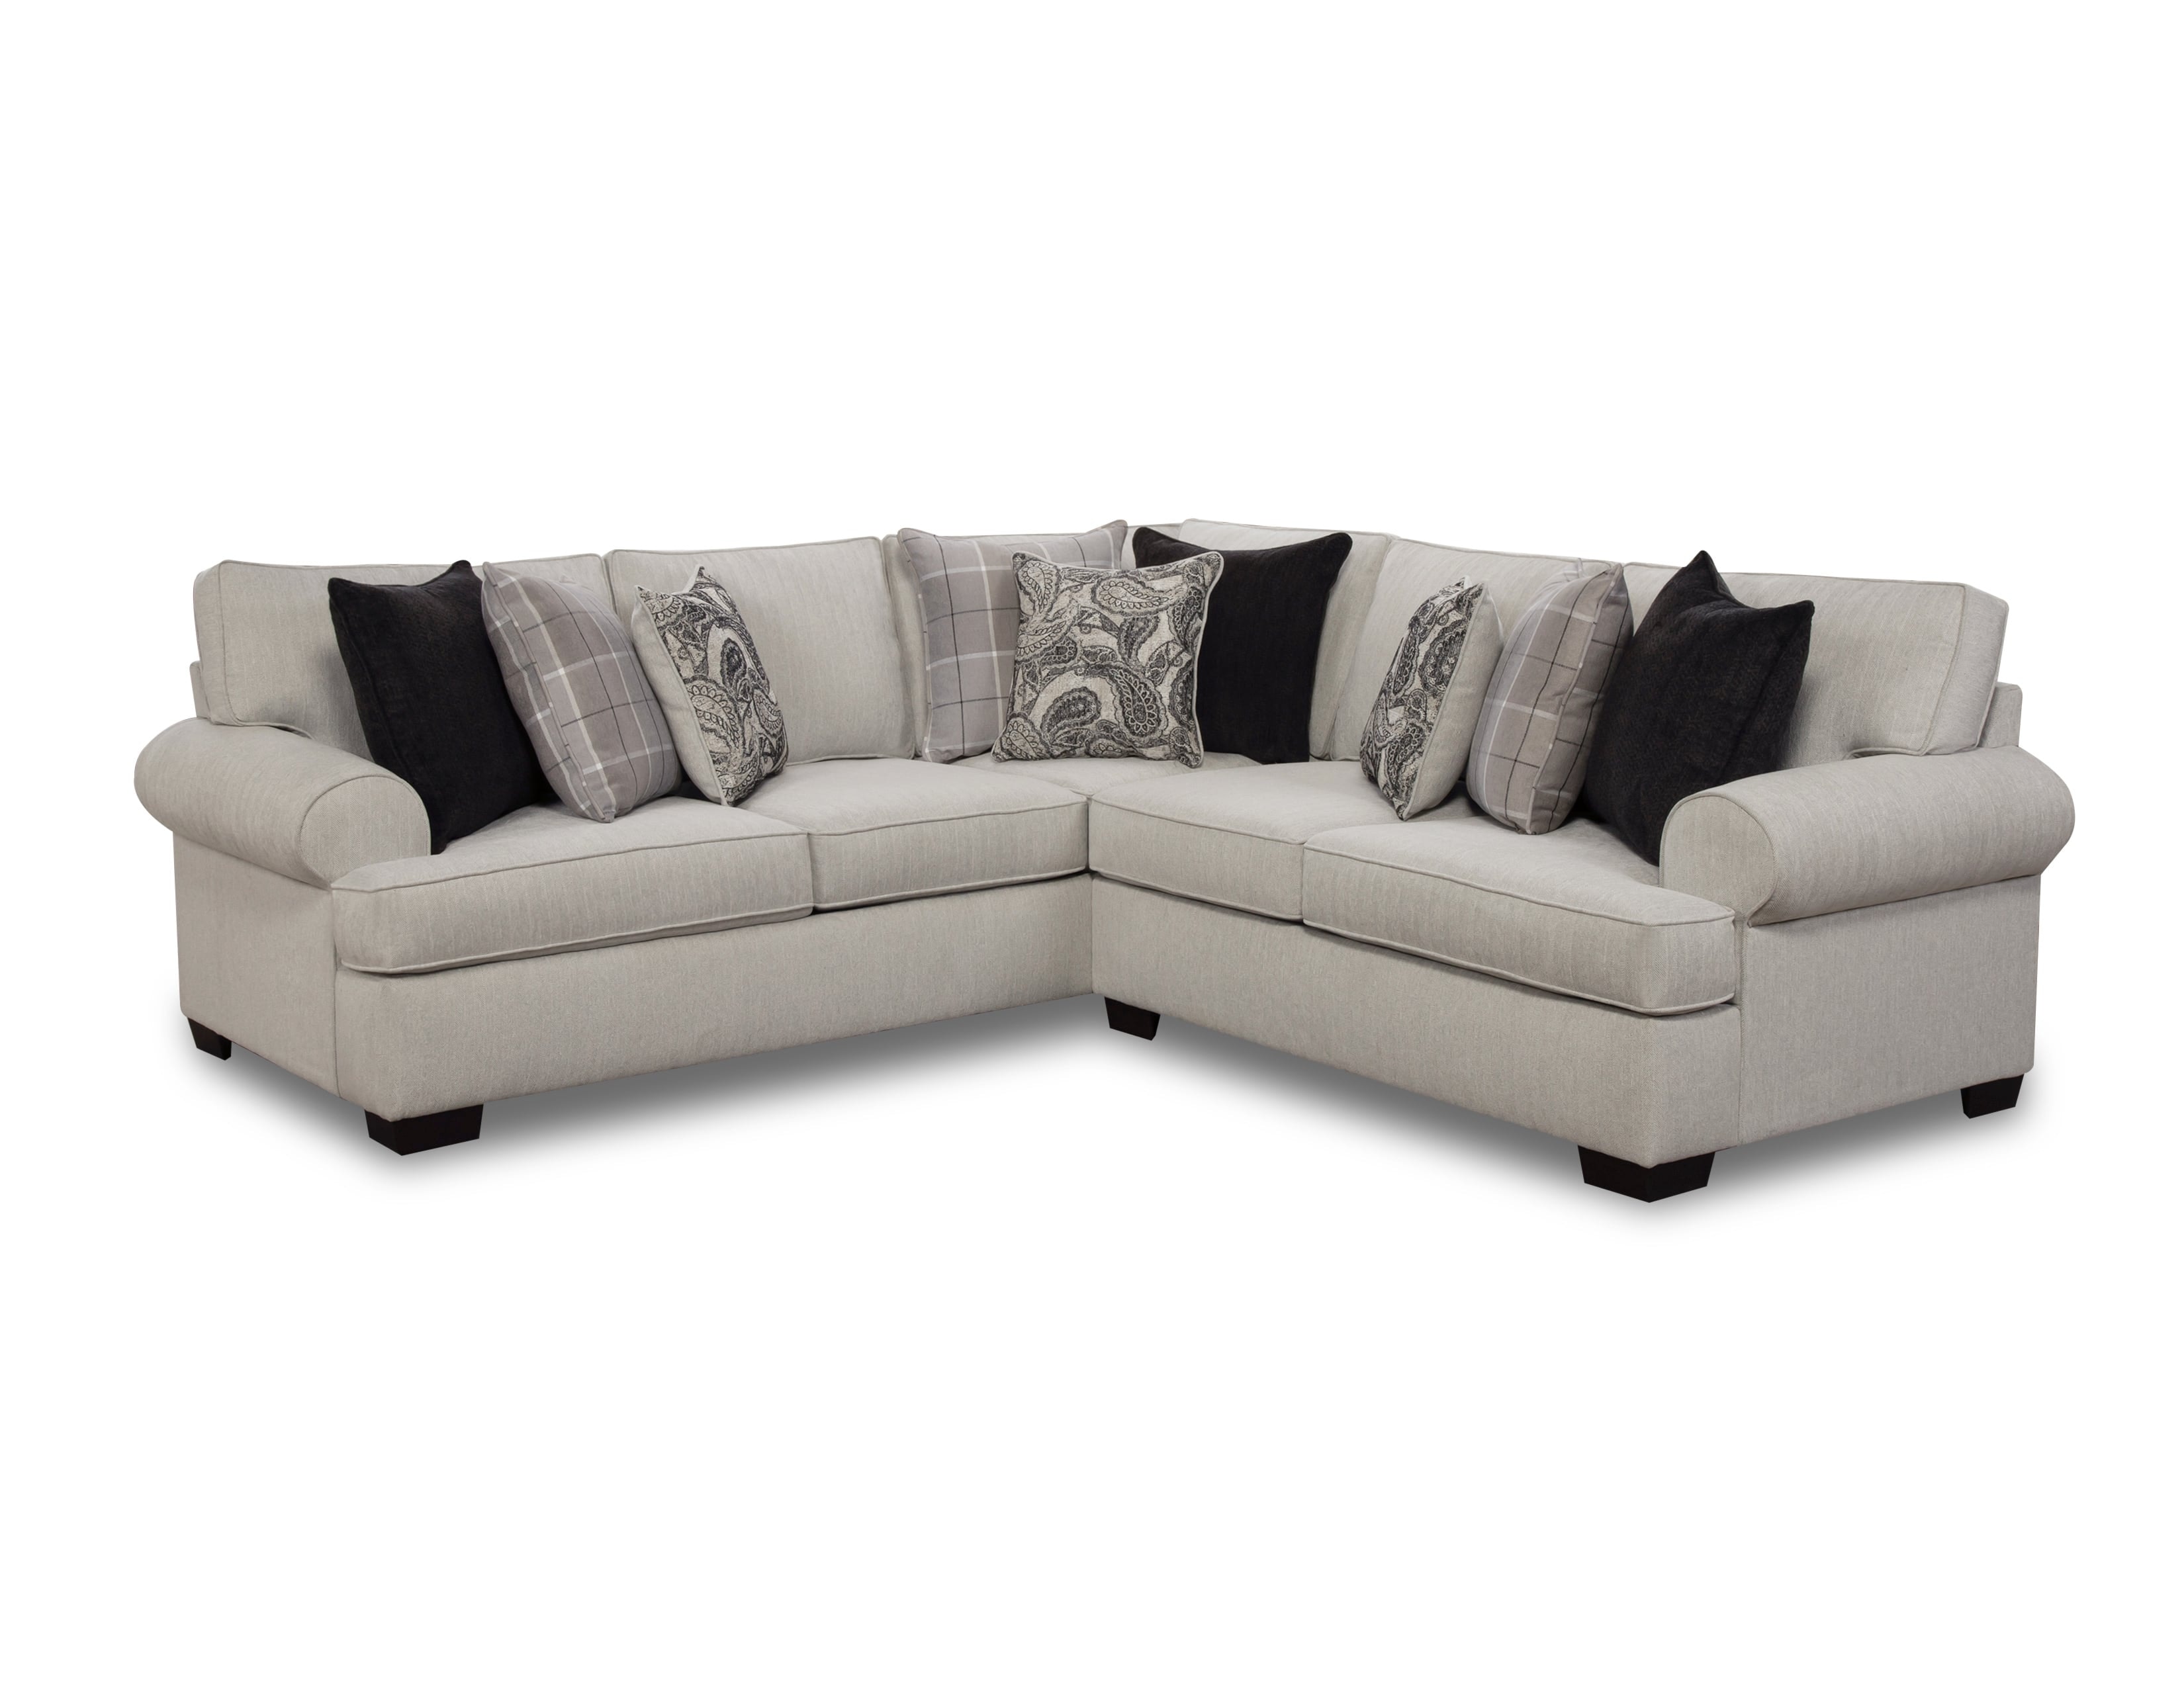 Behold Home 2301 Cooper 2301-08-1711-01x1+2301-05-1711-01x1 Contemporary  2-Piece Sectional Sofa with Rolled Arms Pilgrim Furniture City  Sectional Sofa Groups